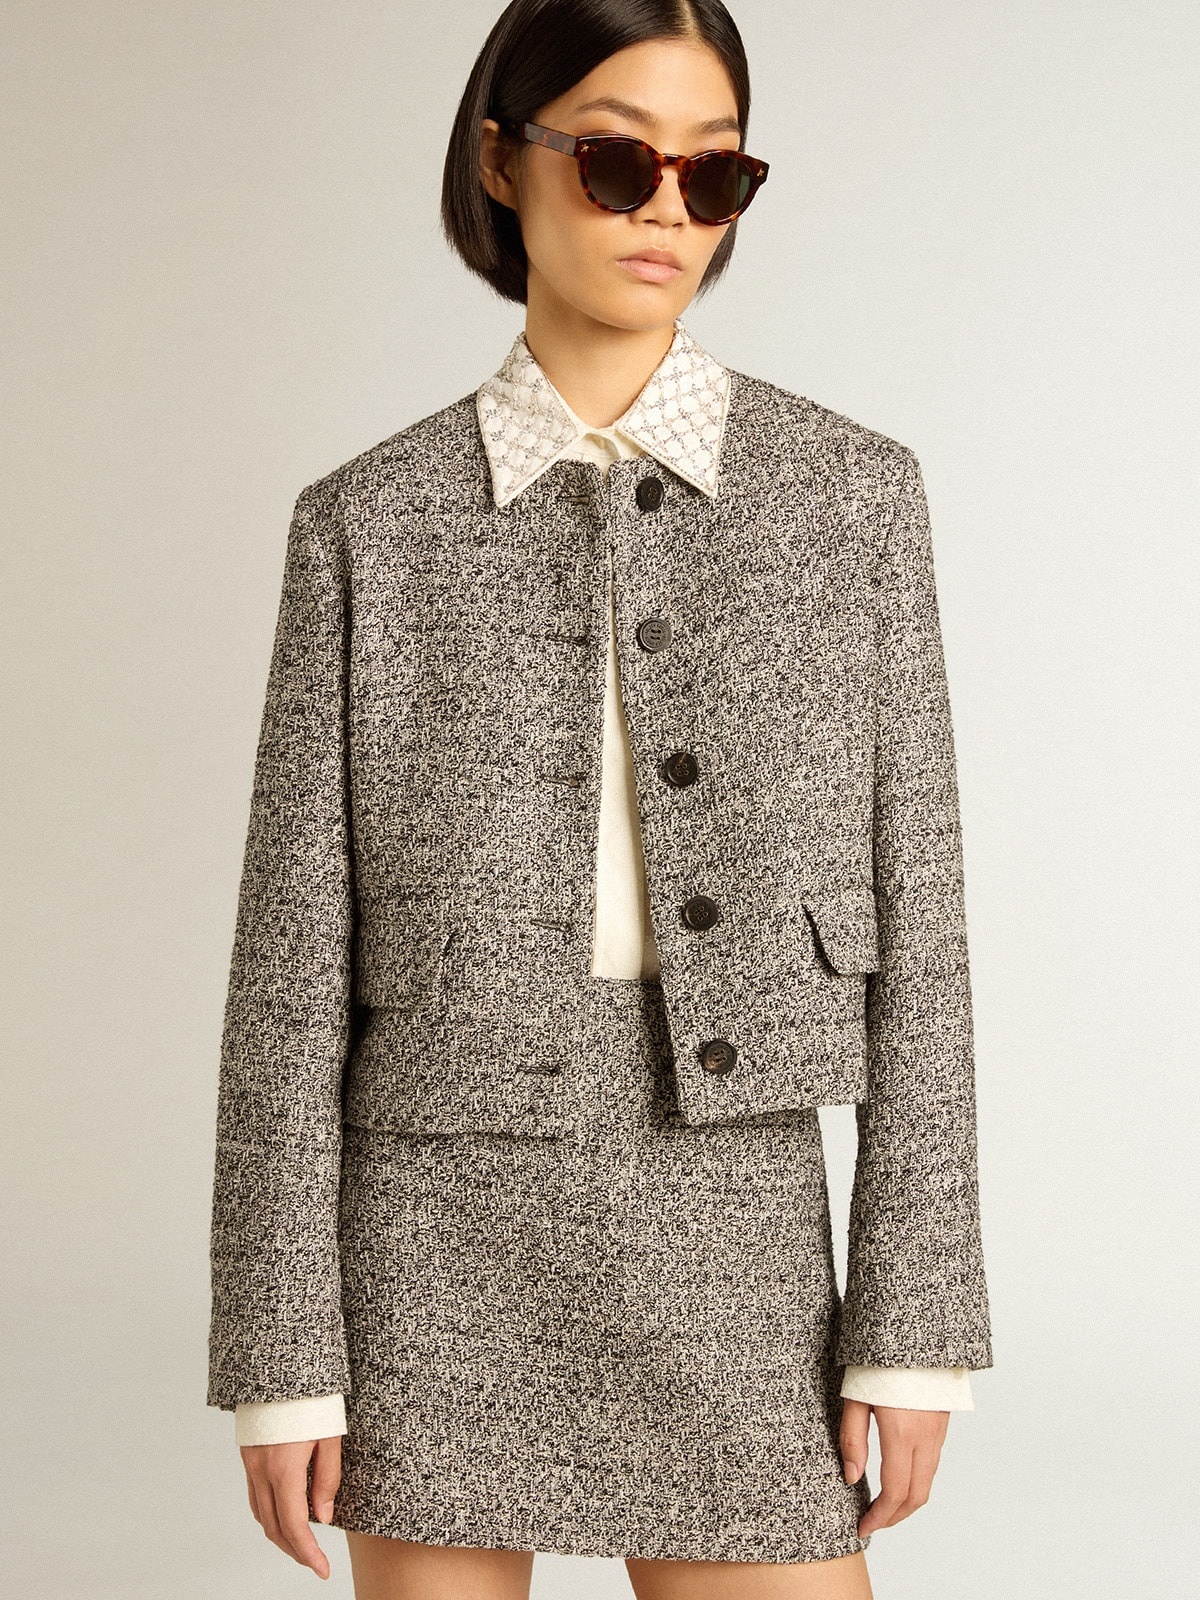 Boxy cropped jacket in gray bouclé fabric - 2